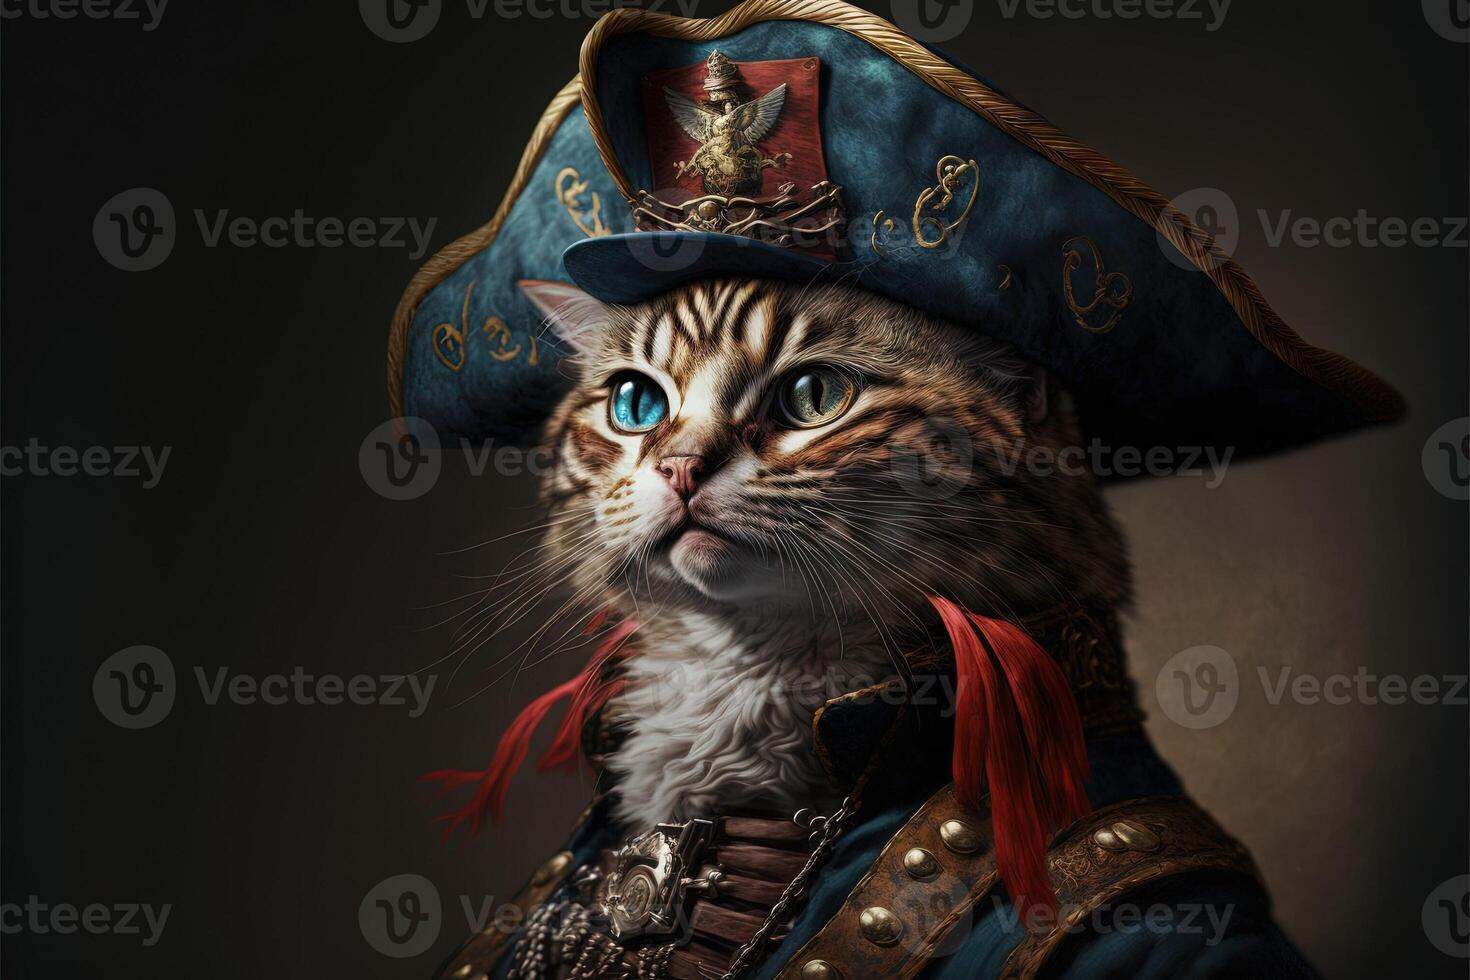 cat pirate captain wearing a tricorn hat illustration photo